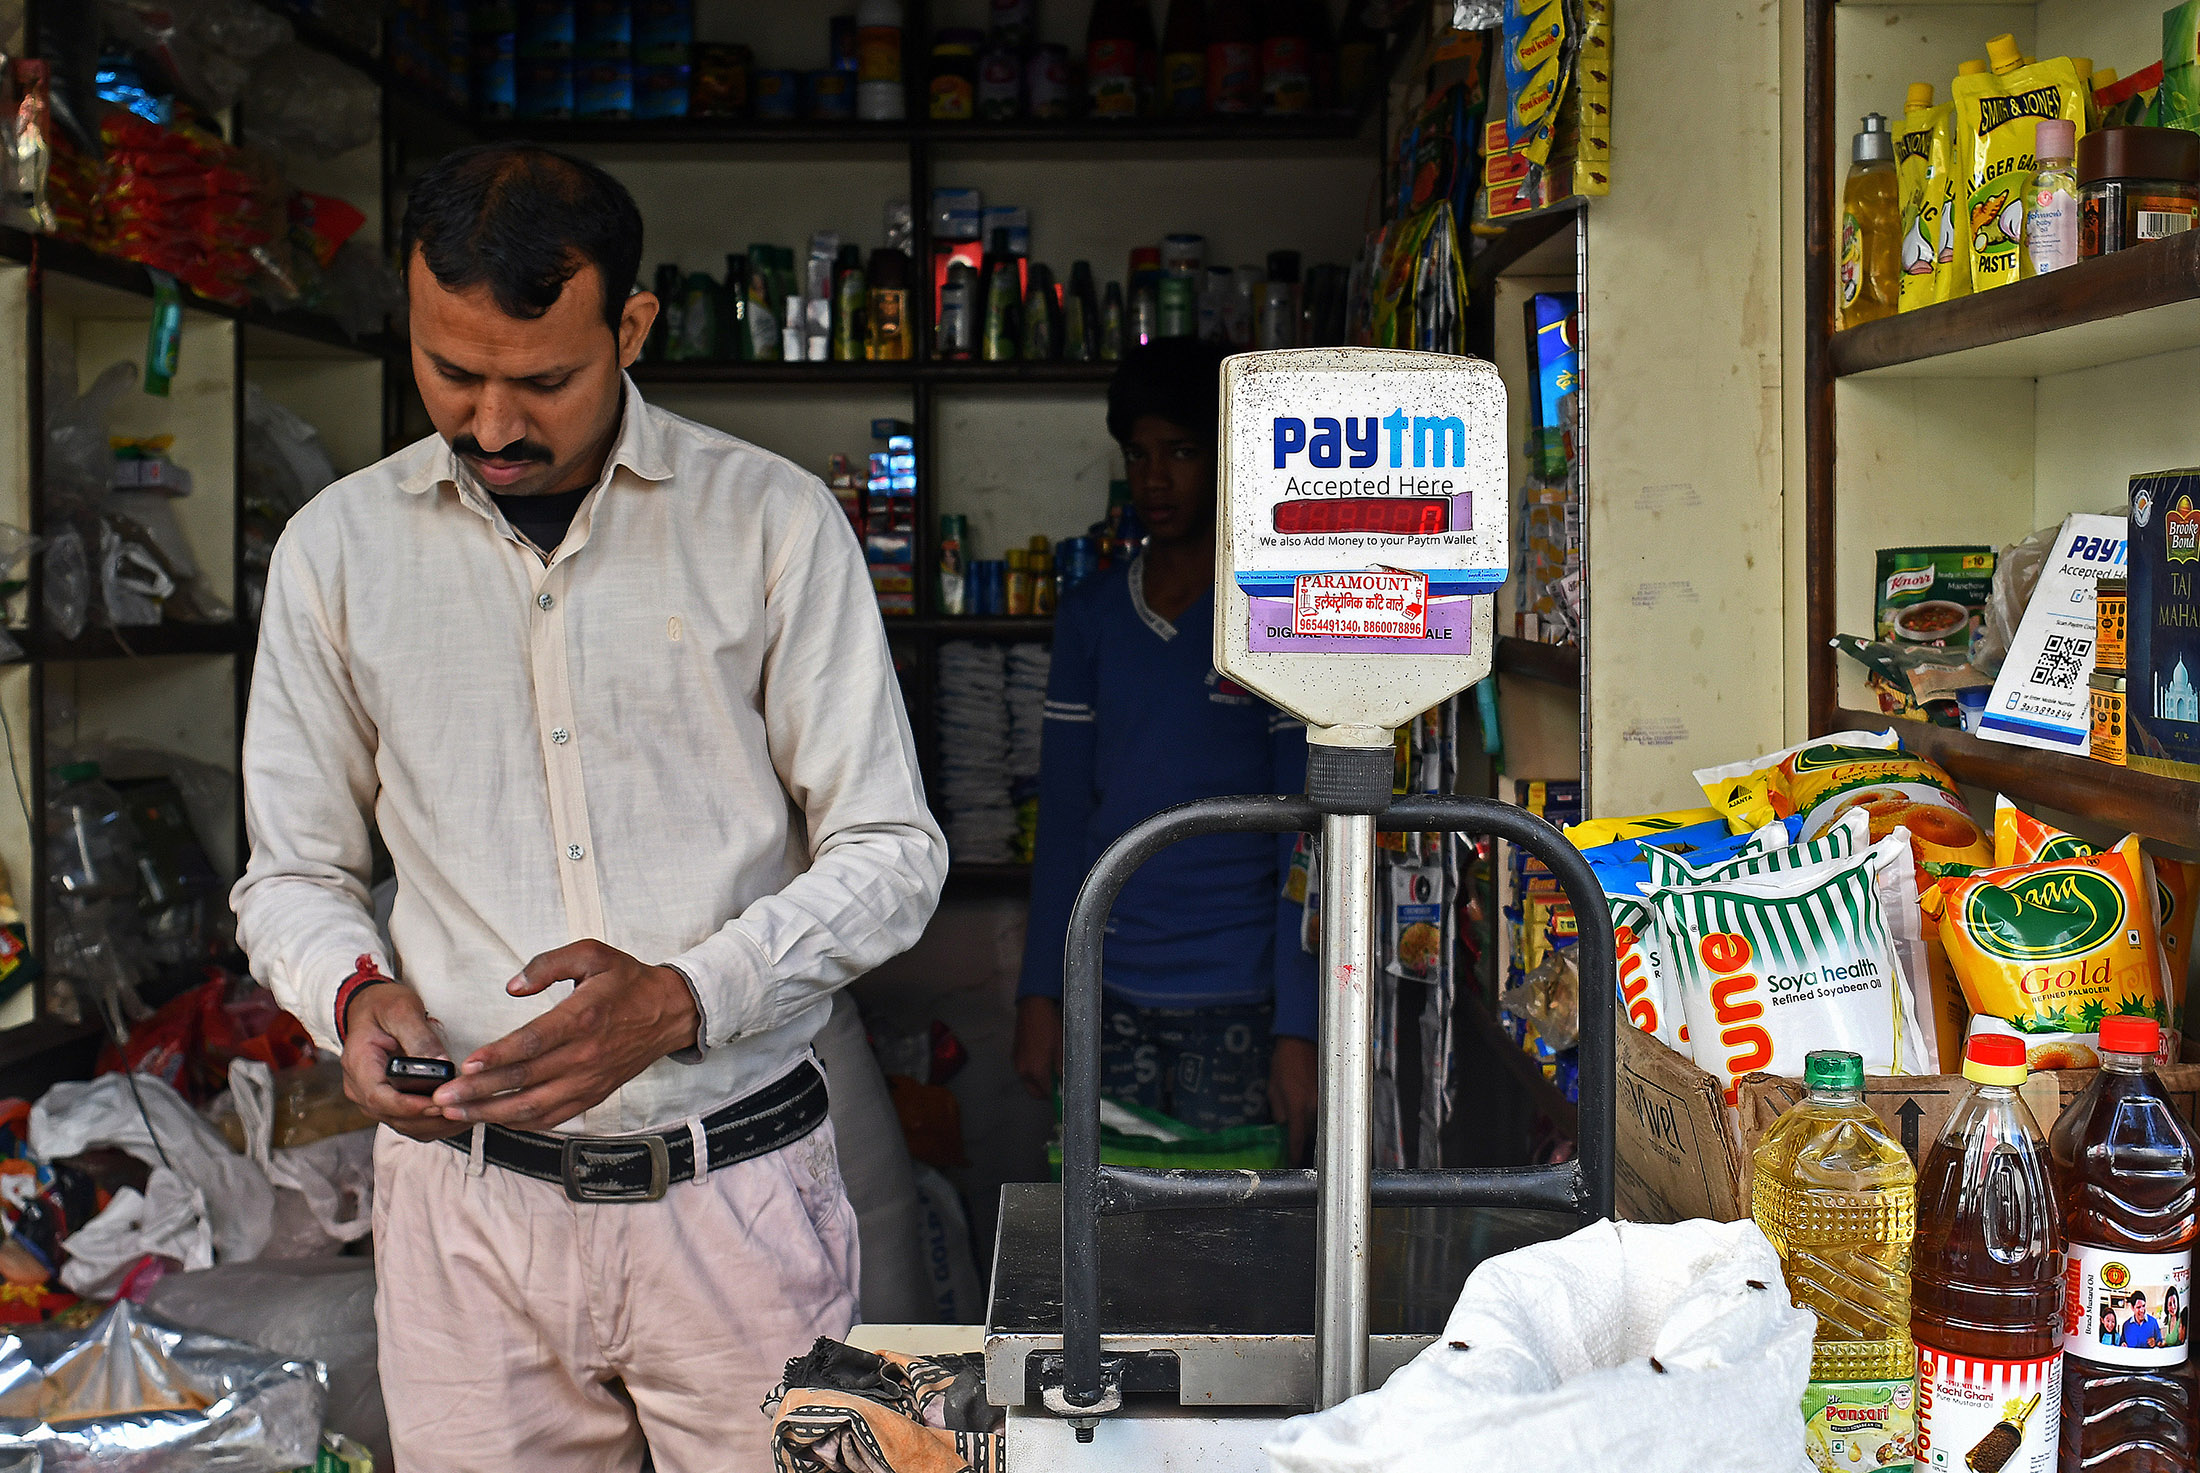 A man using a mobile device stands next to a sign for the PayTM online payment method, operated by One97 Communications Ltd., at a grocery store in Delhi, India, on Friday, Nov. 25, 2016. India's government is grappling with a furor over a rupee note ban that invalidated 86 percent of the currency in circulation.
